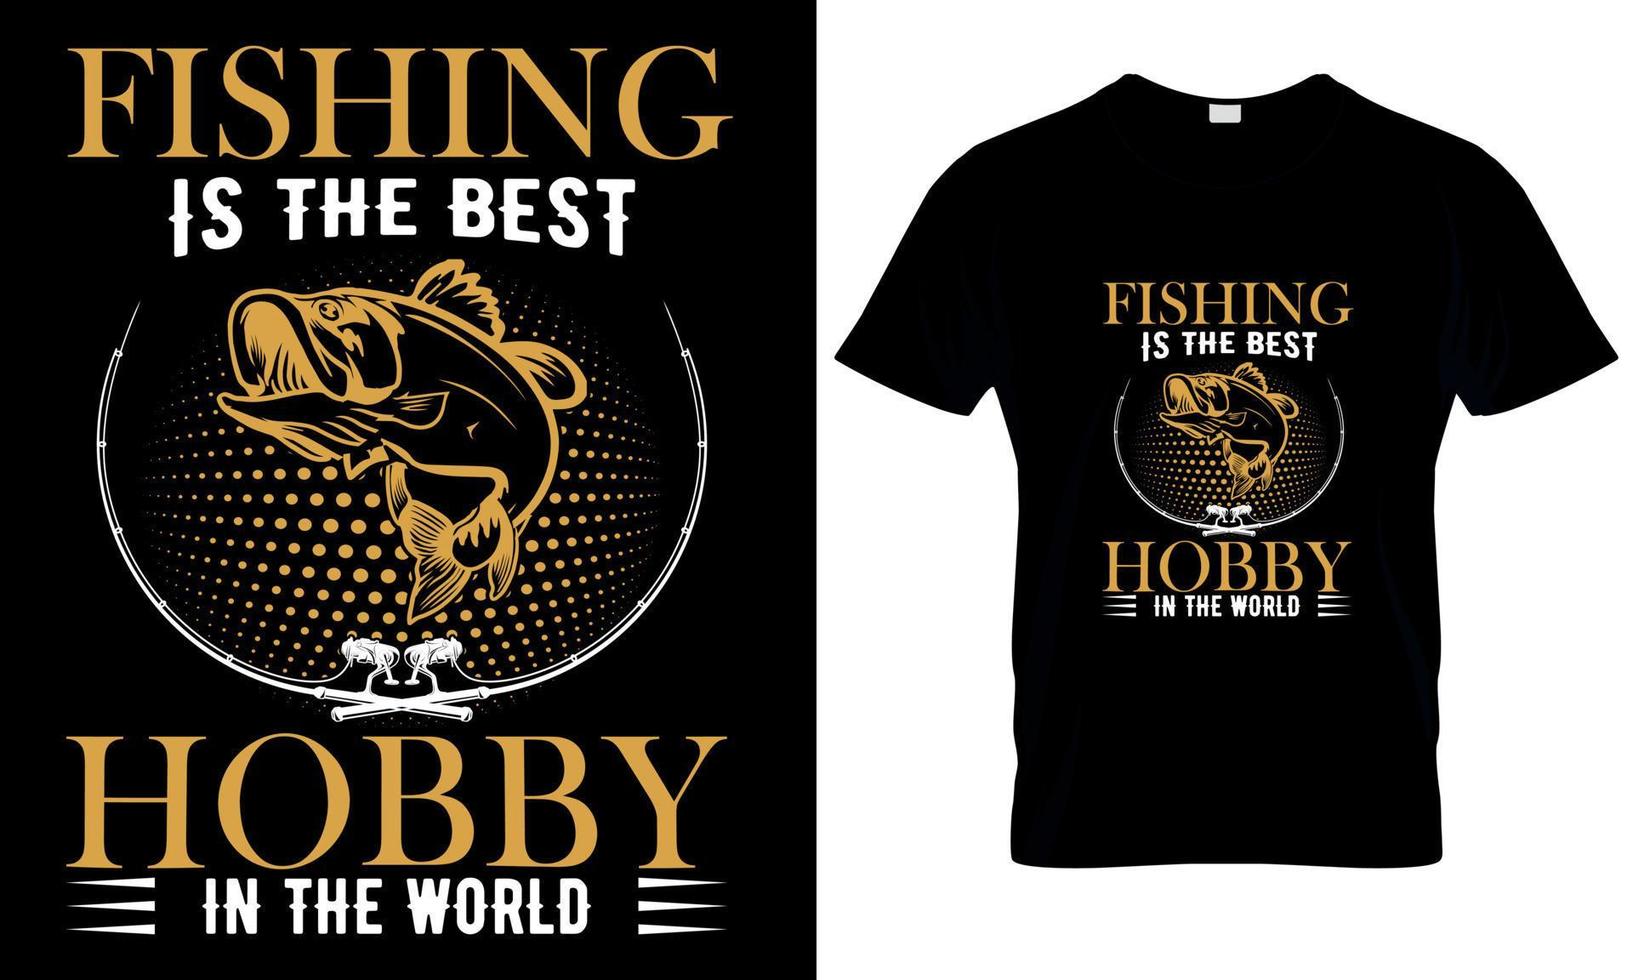 Fishing is the best hobby in the world t shirt vector